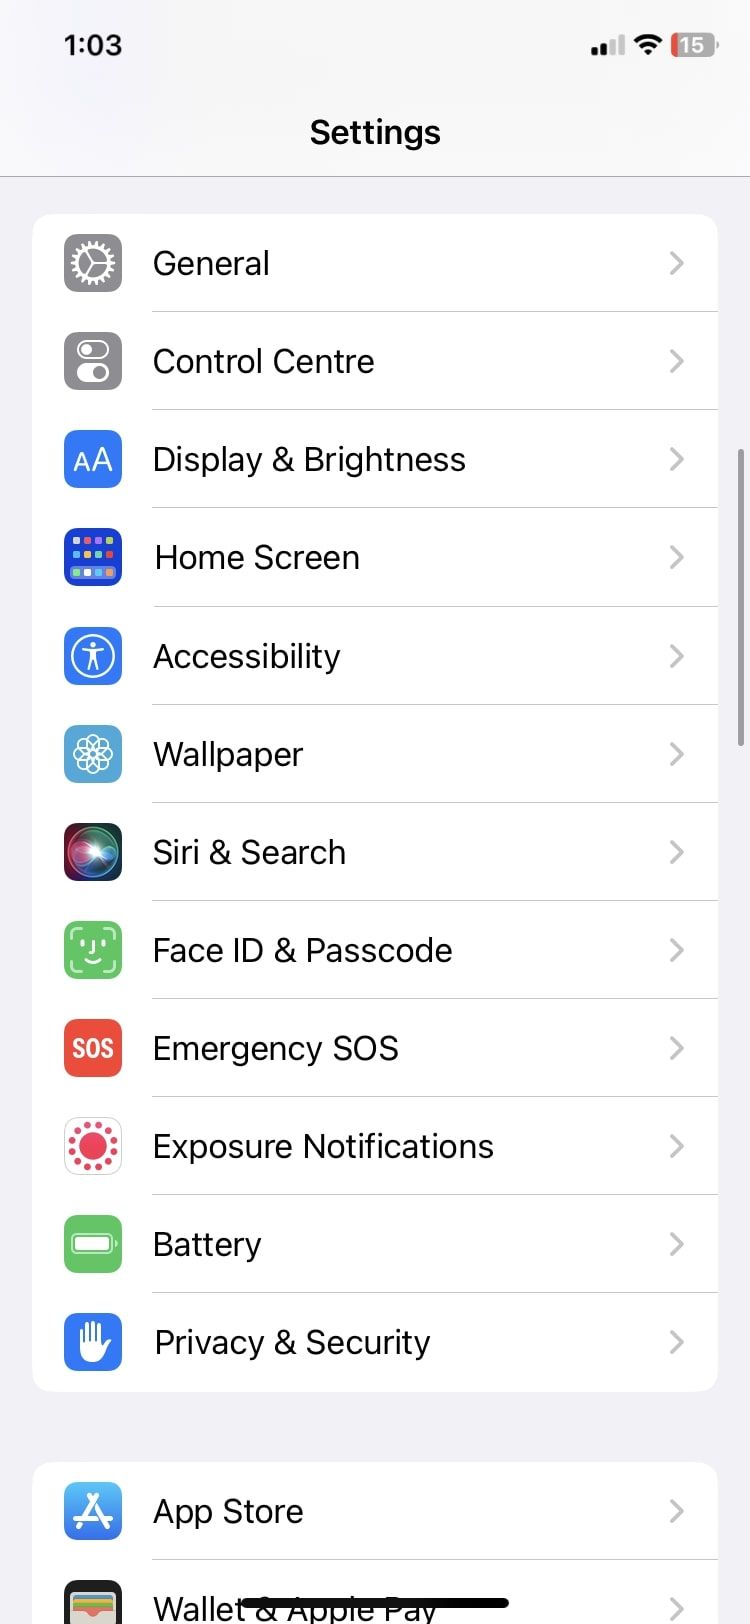 Face ID & Passcode settings